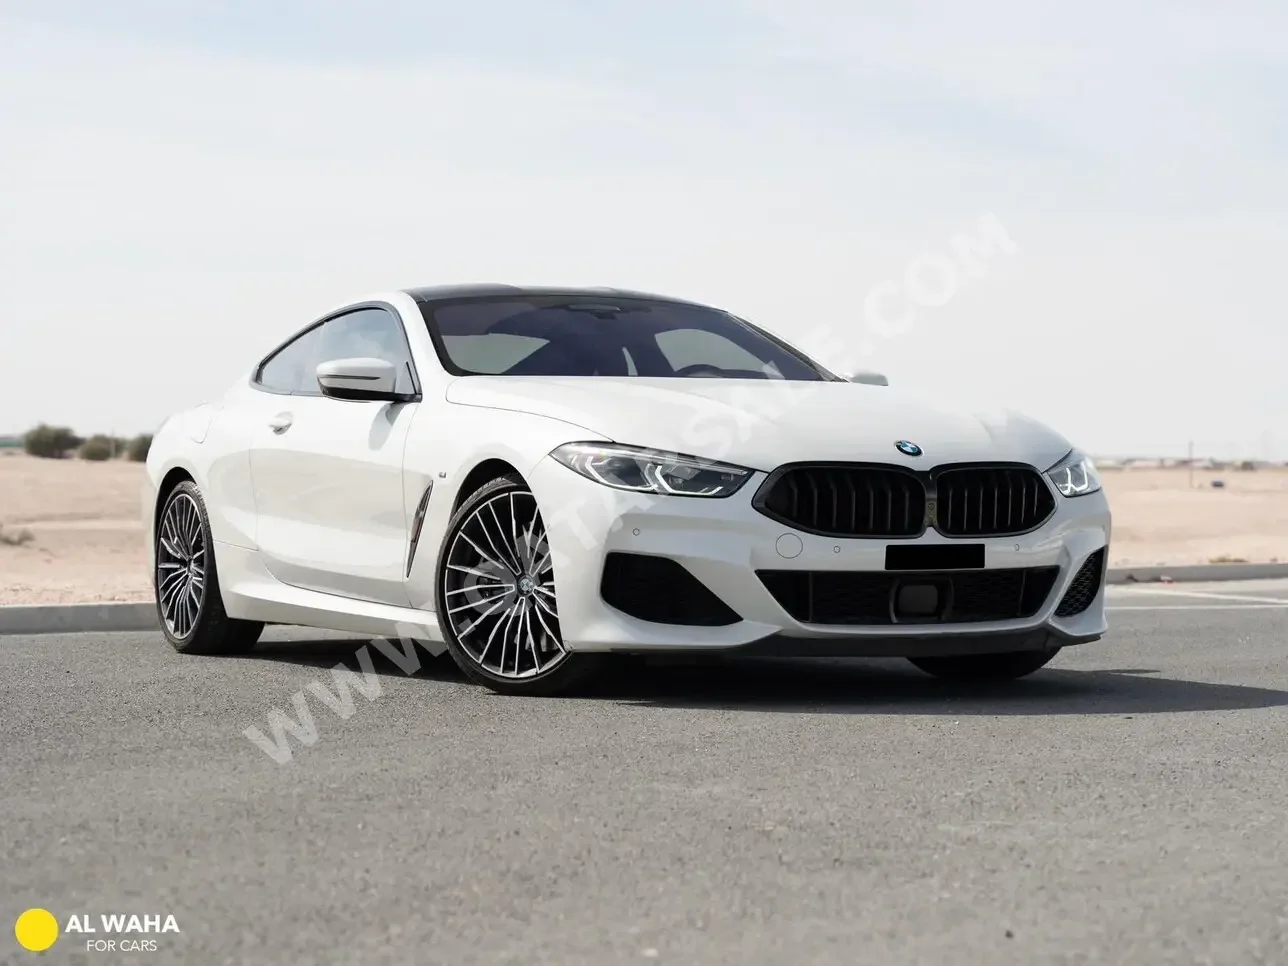 BMW  M-Series  850 i  2019  Automatic  32,500 Km  8 Cylinder  Rear Wheel Drive (RWD)  Coupe / Sport  White